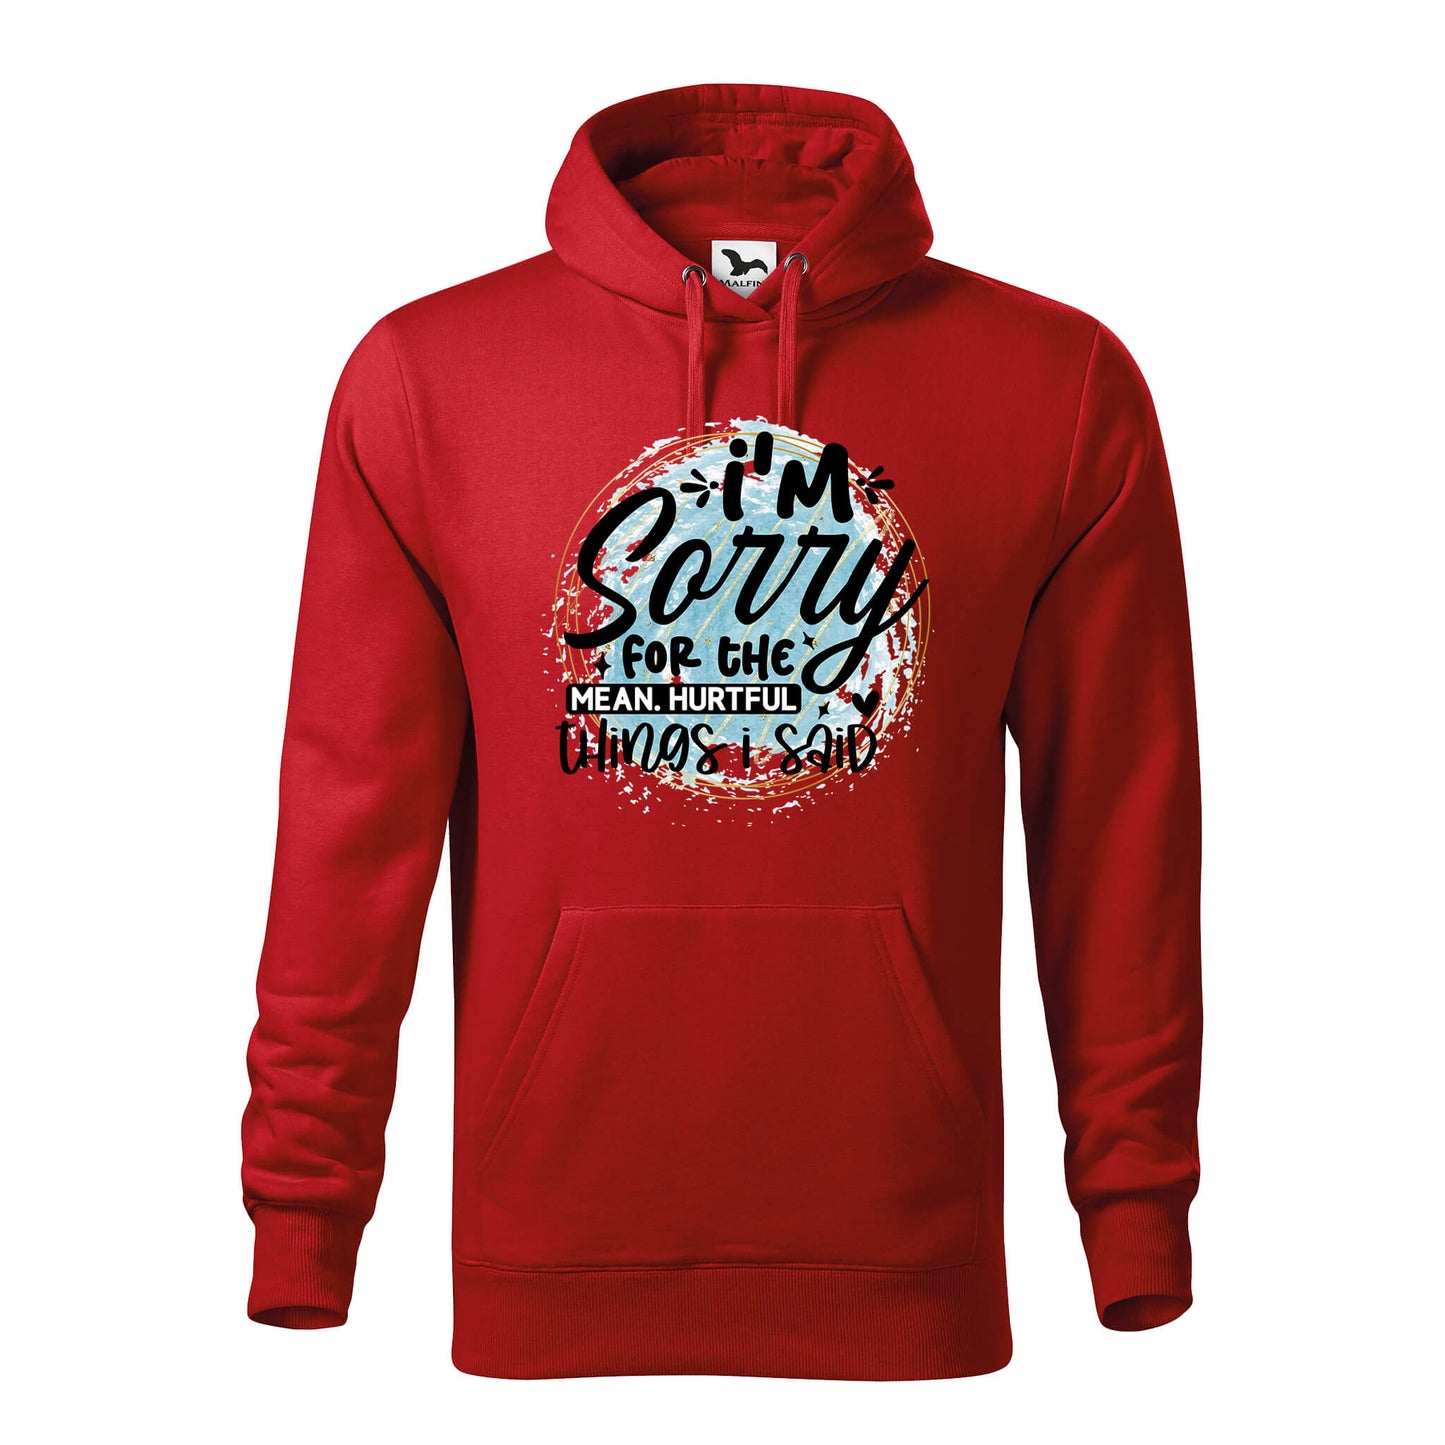 Im sorry for the things i said hoodie - rvdesignprint